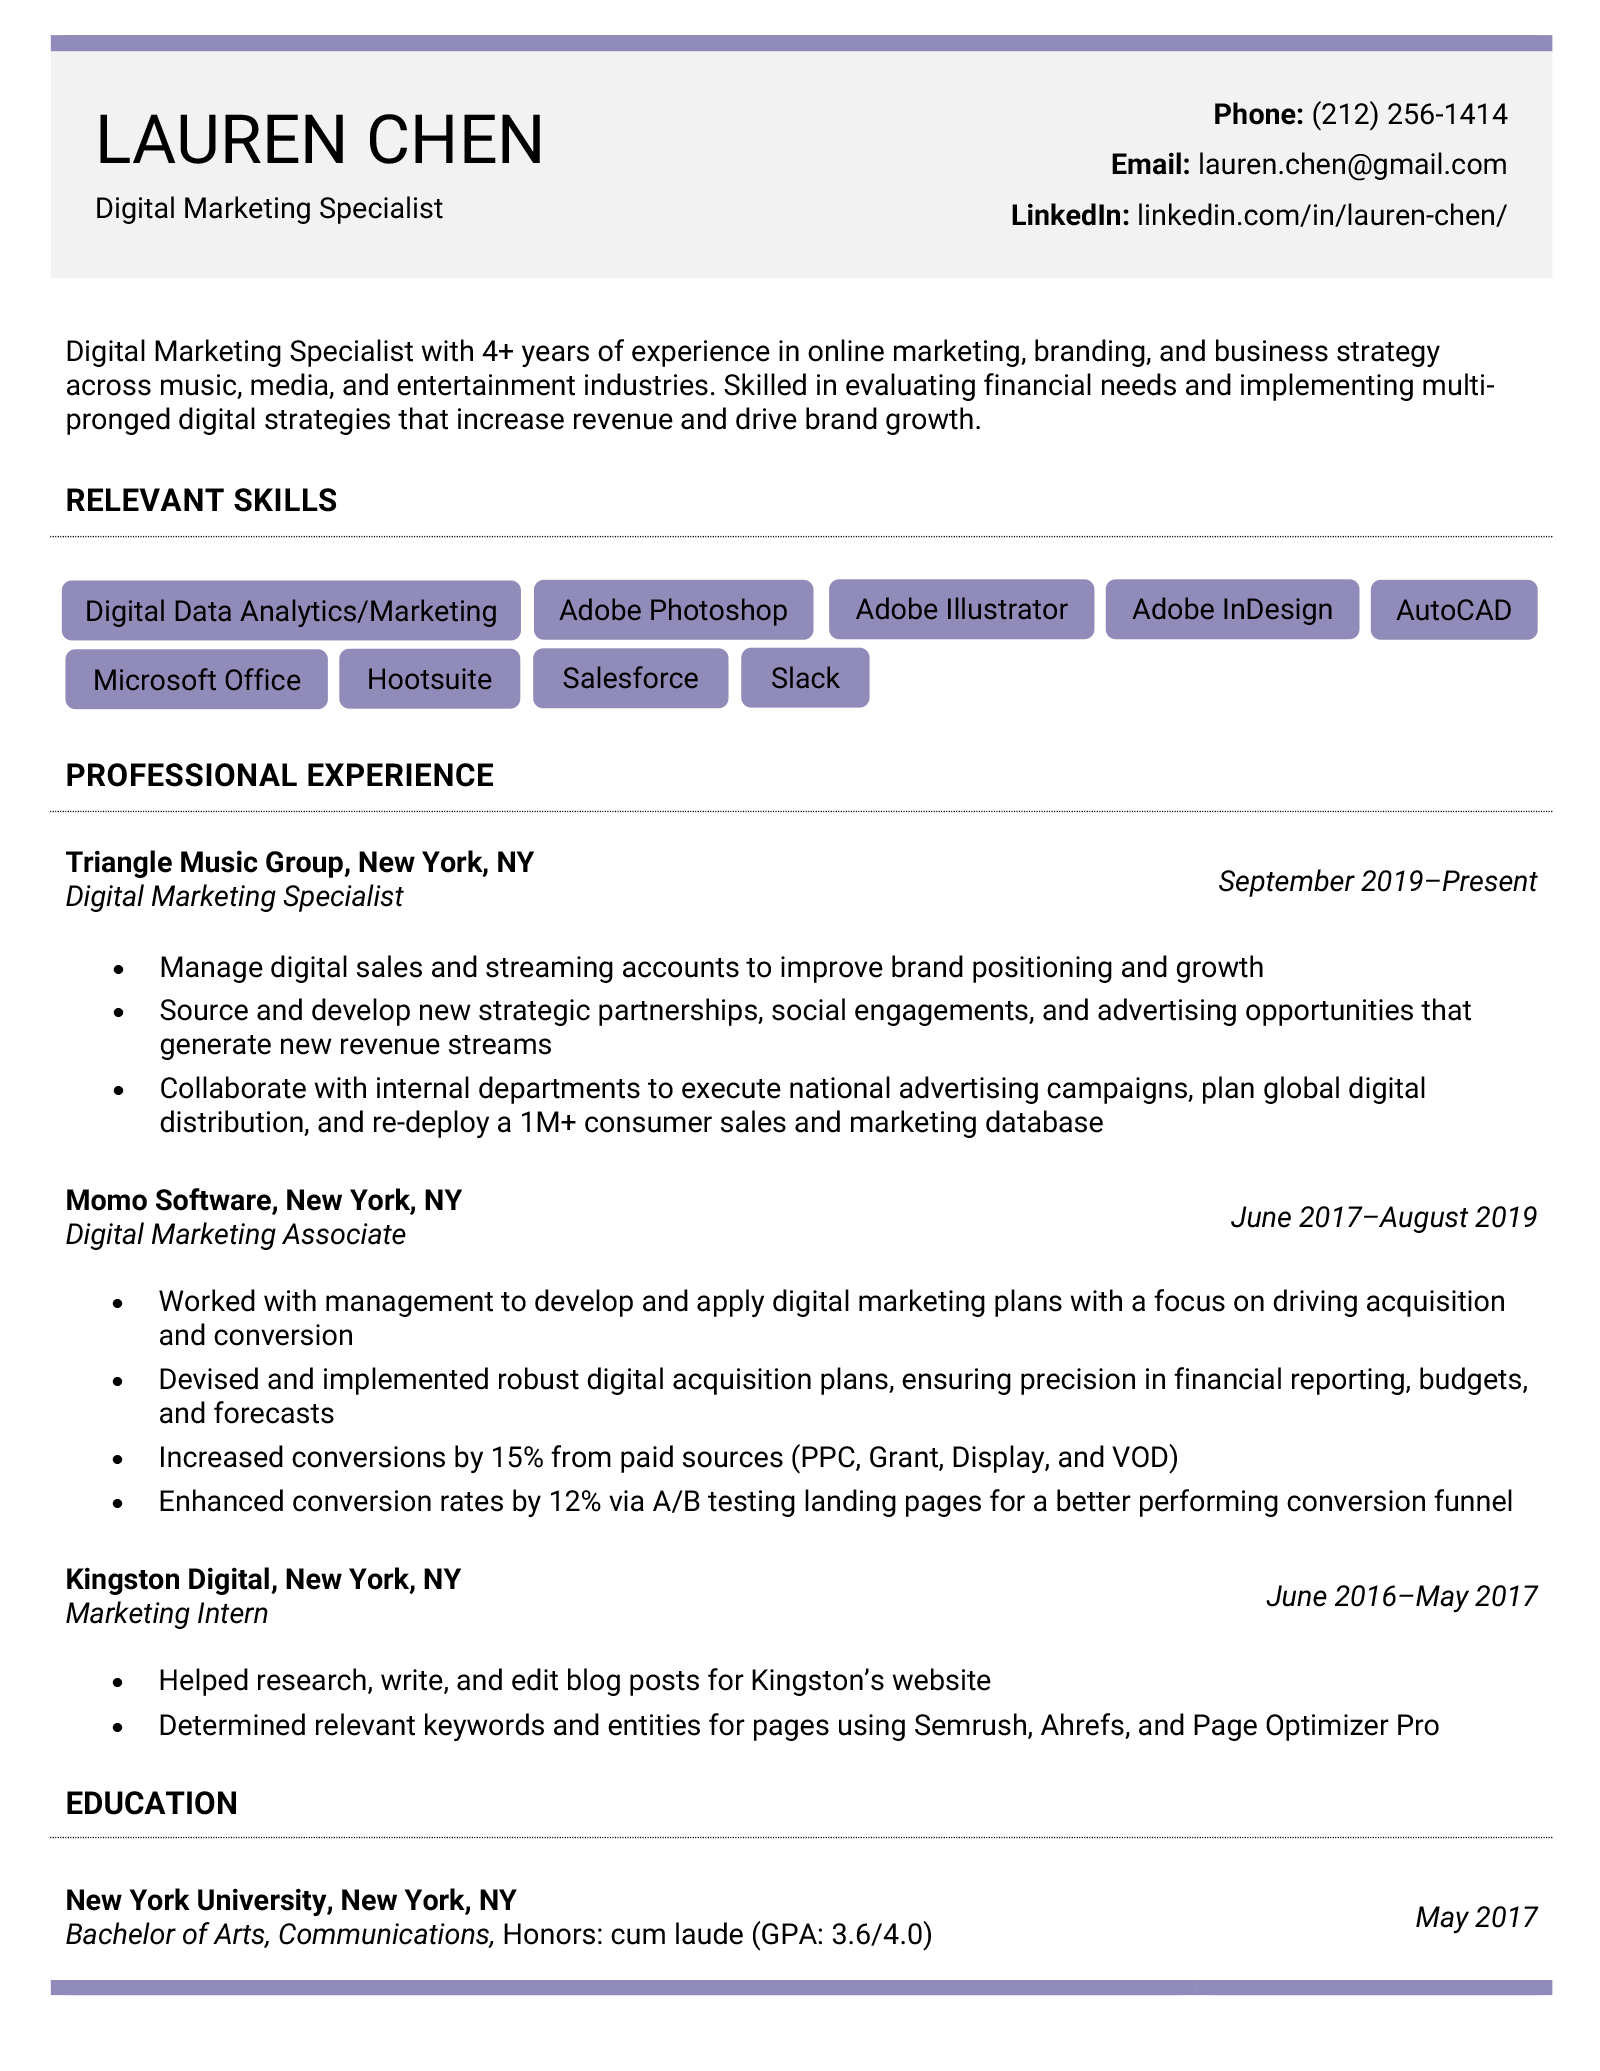 An example of a one page resume